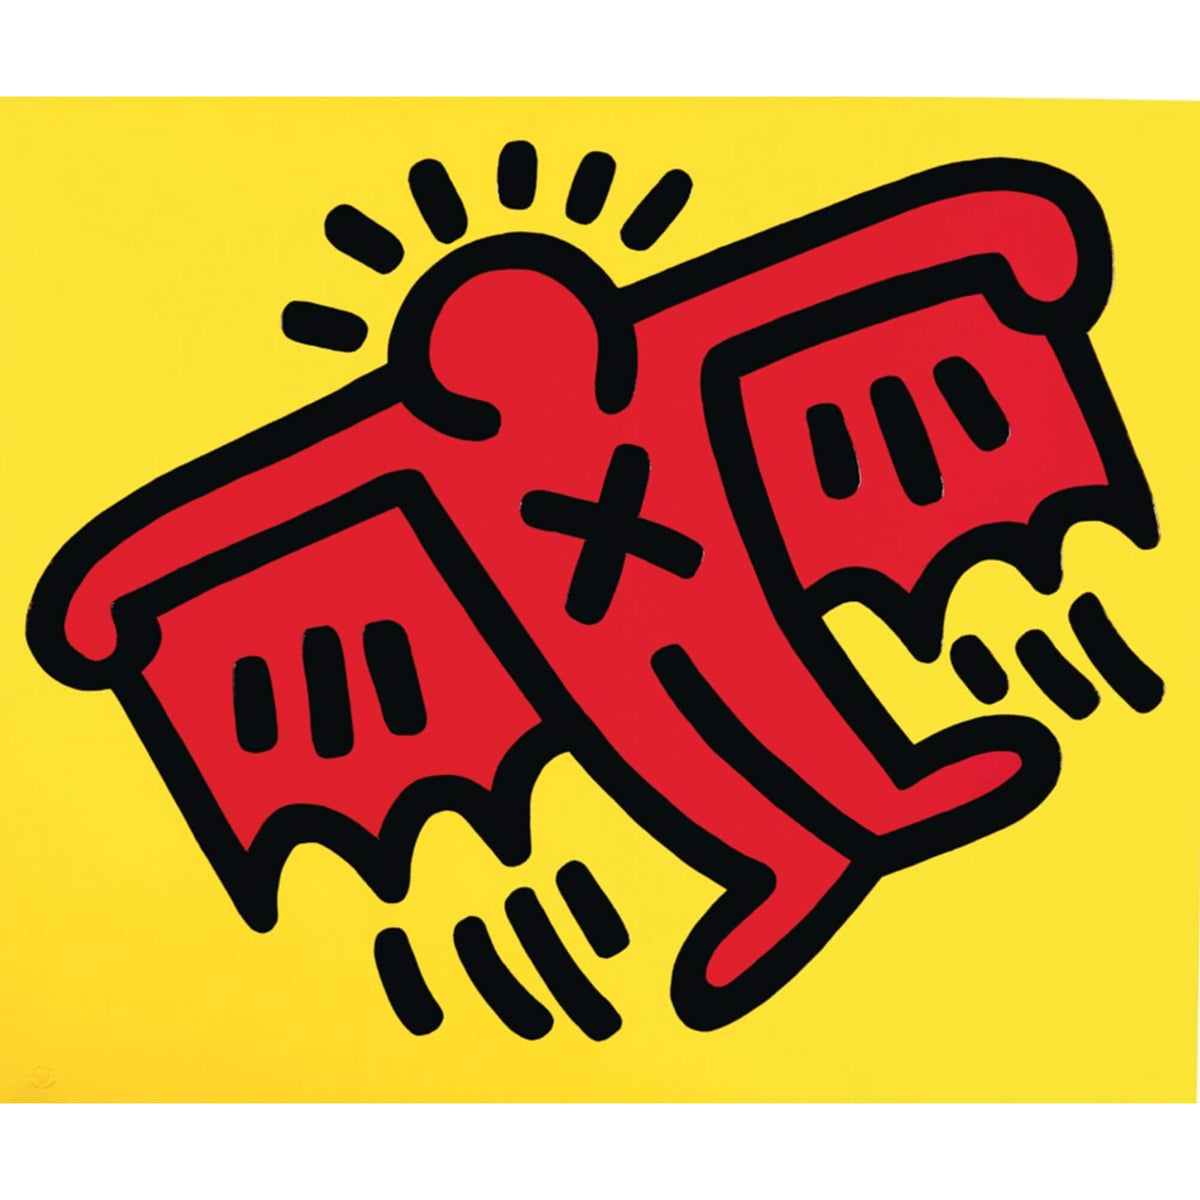 Keith Haring's Flying Devil Print - Hype Museum